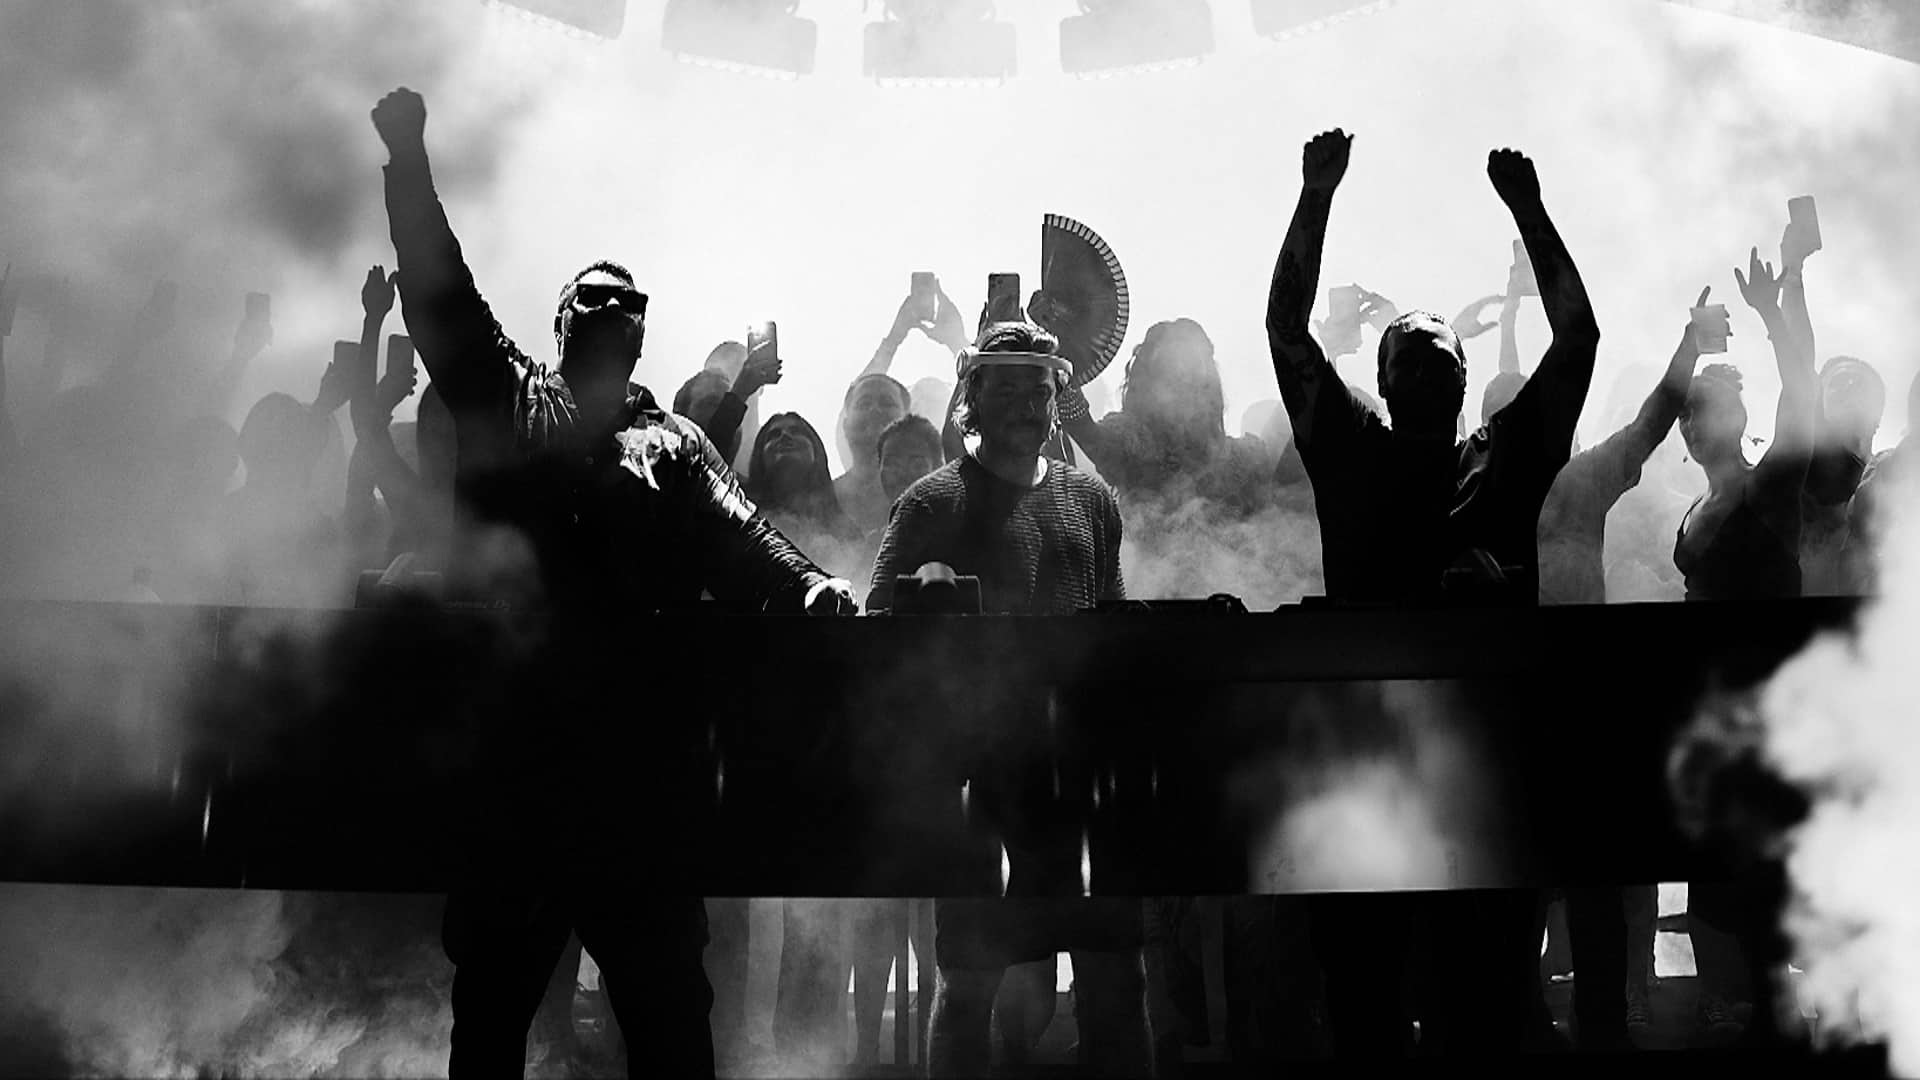 Swedish House Mafia play a new version of ‘Omen’ in Italy: Watch